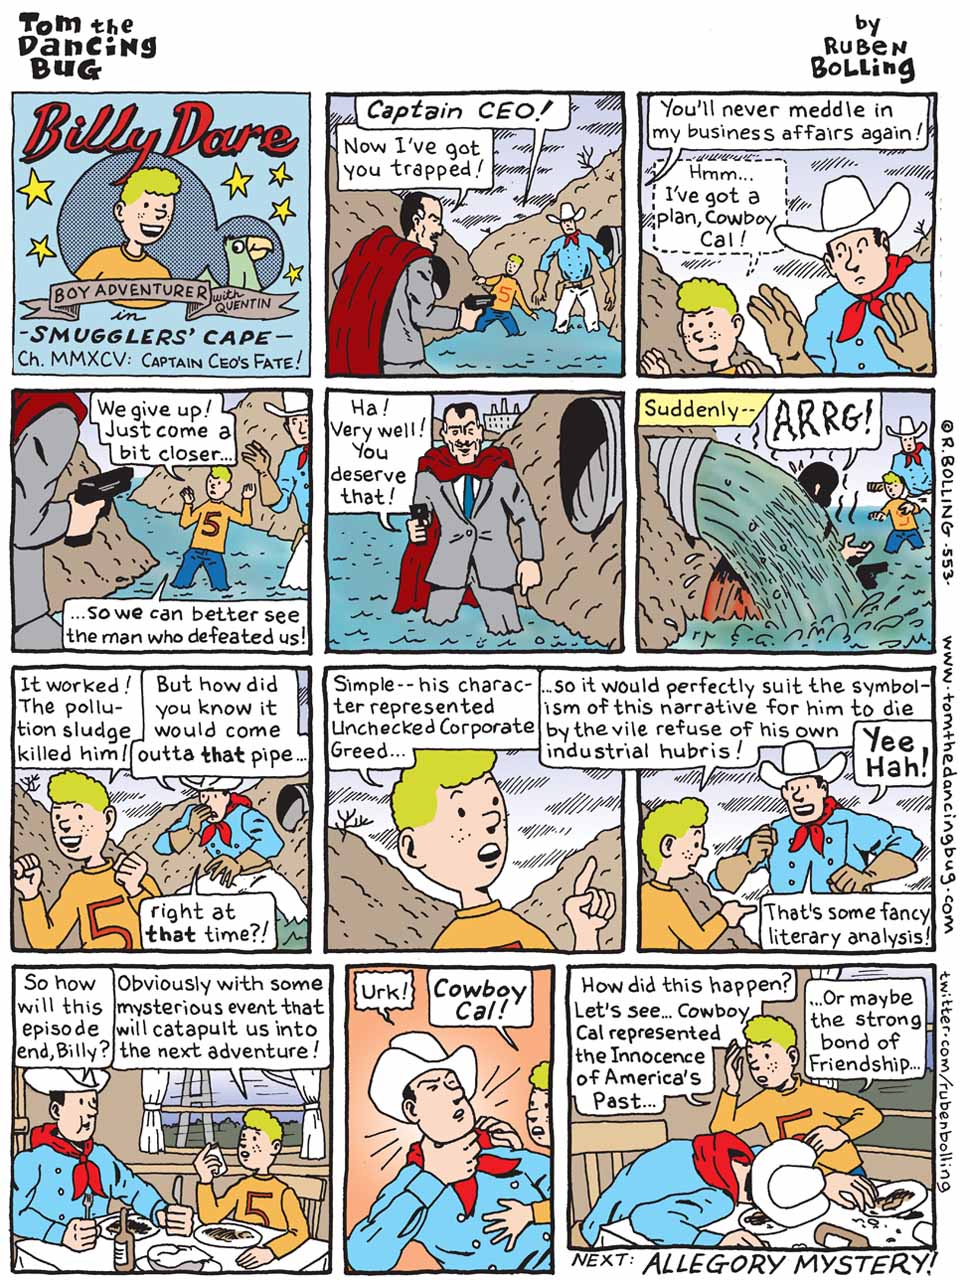 http://boingboing.net/wp-content/uploads/2011/08/553rcbCOMIC-billy-dare-captain-ceo.jpg